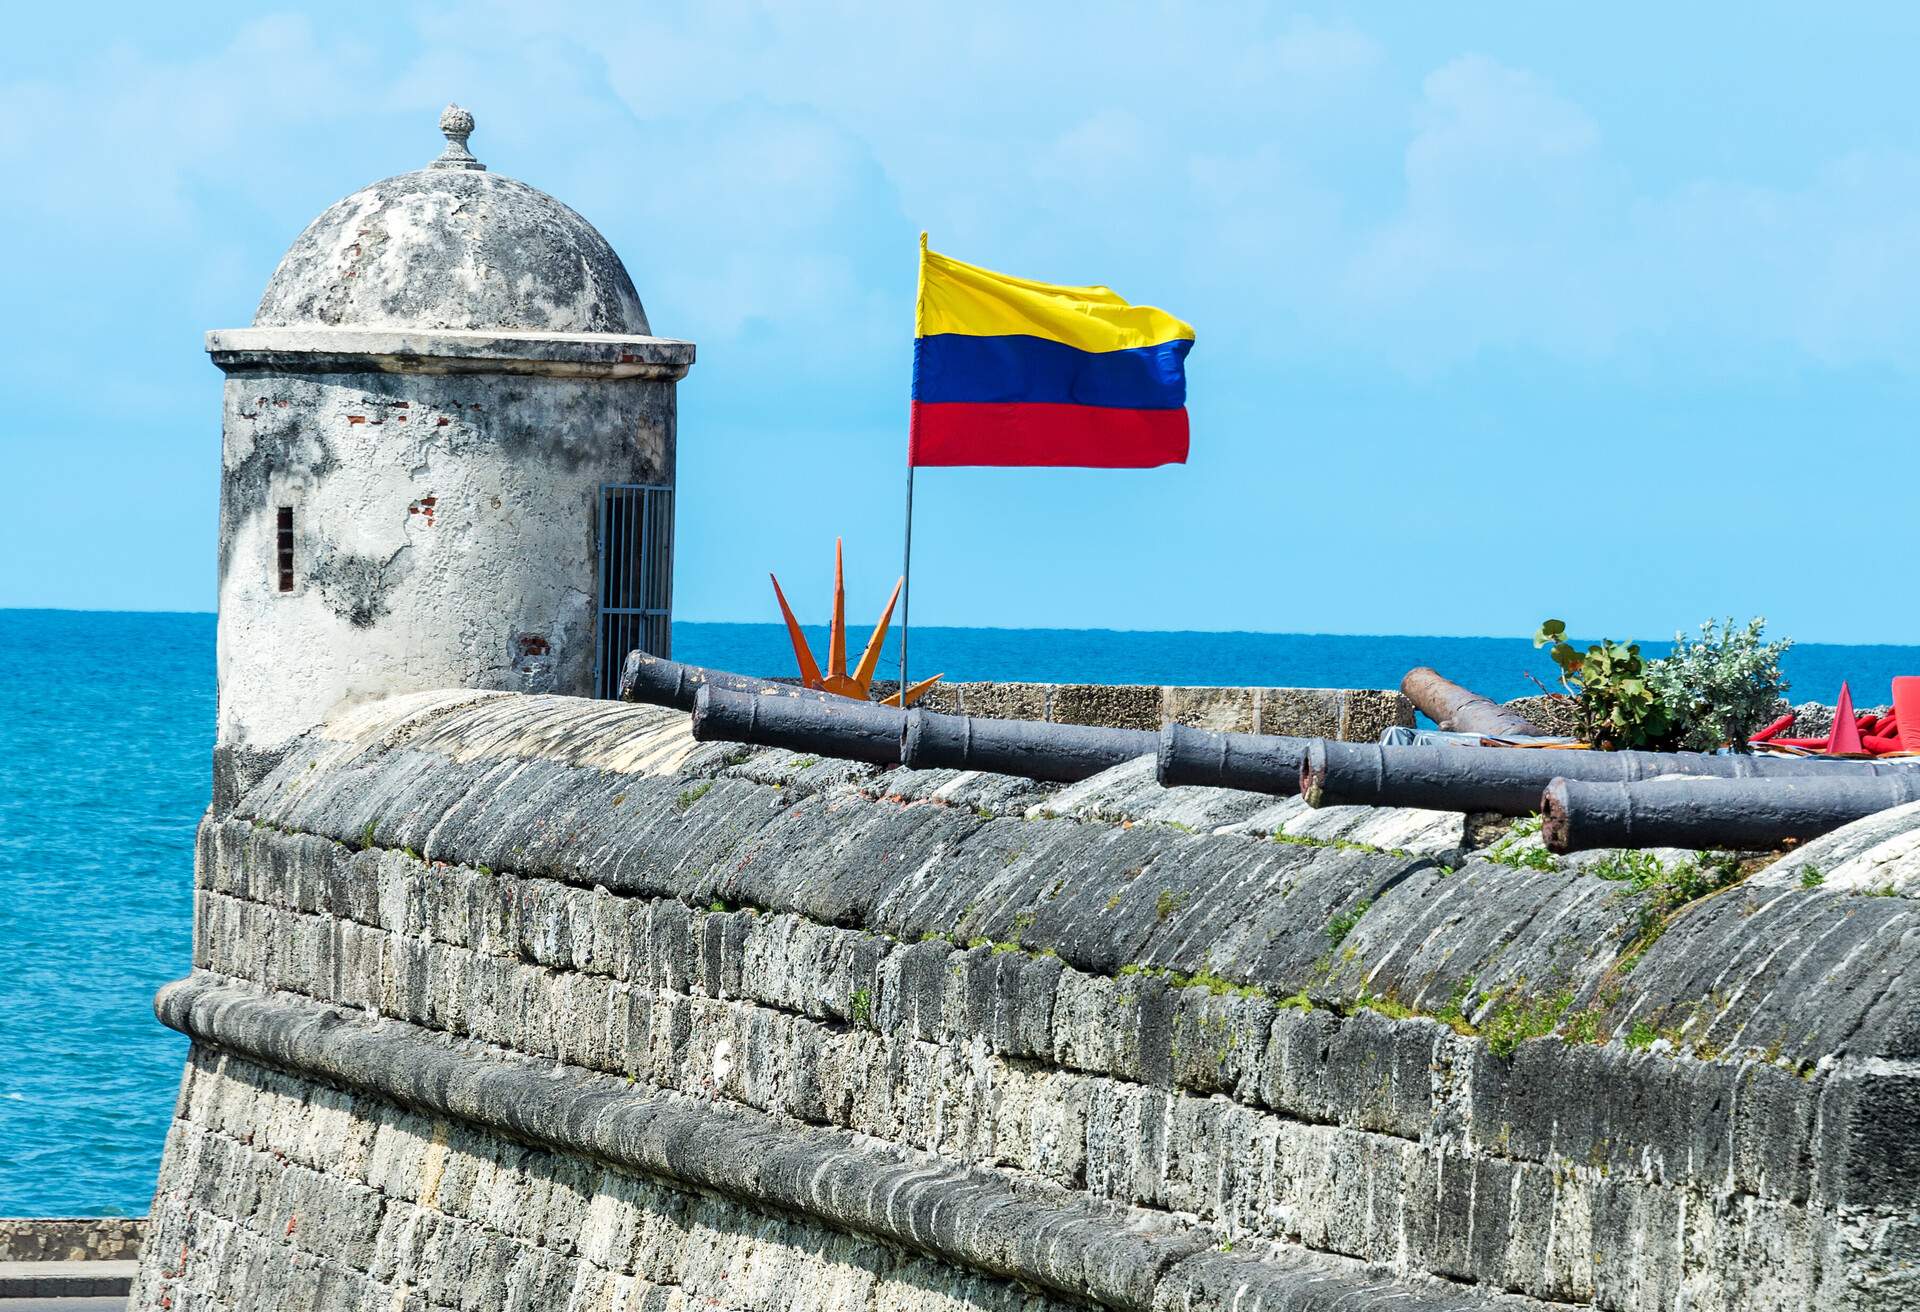 Defensive wall of Cartagena with a Colombian flag waving and several cannons visible in the old town of Cartagena, Colombia